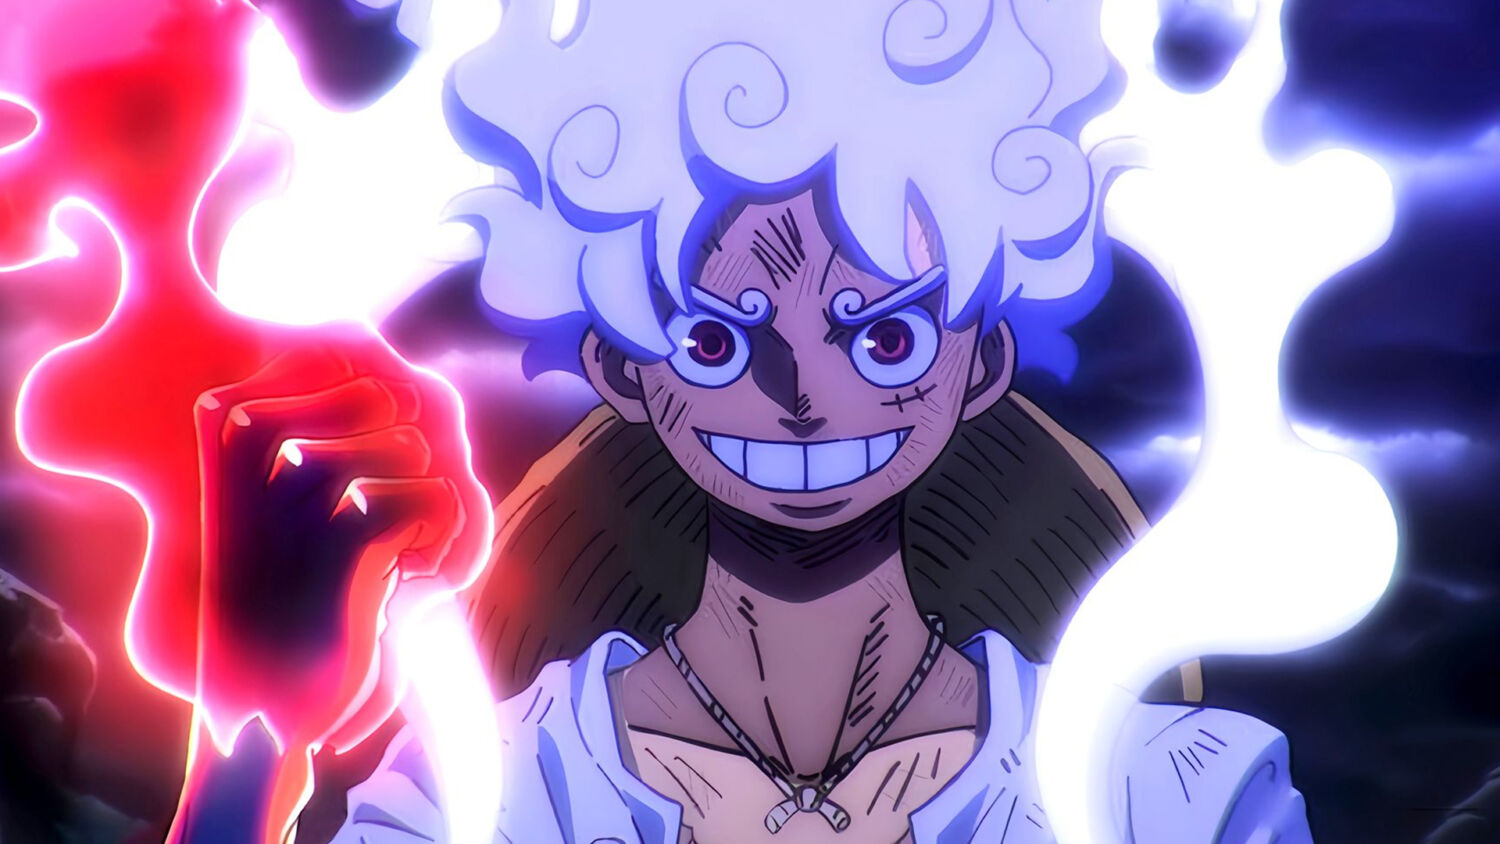 One Piece Video Animates Luffy's Gear Fifth Form